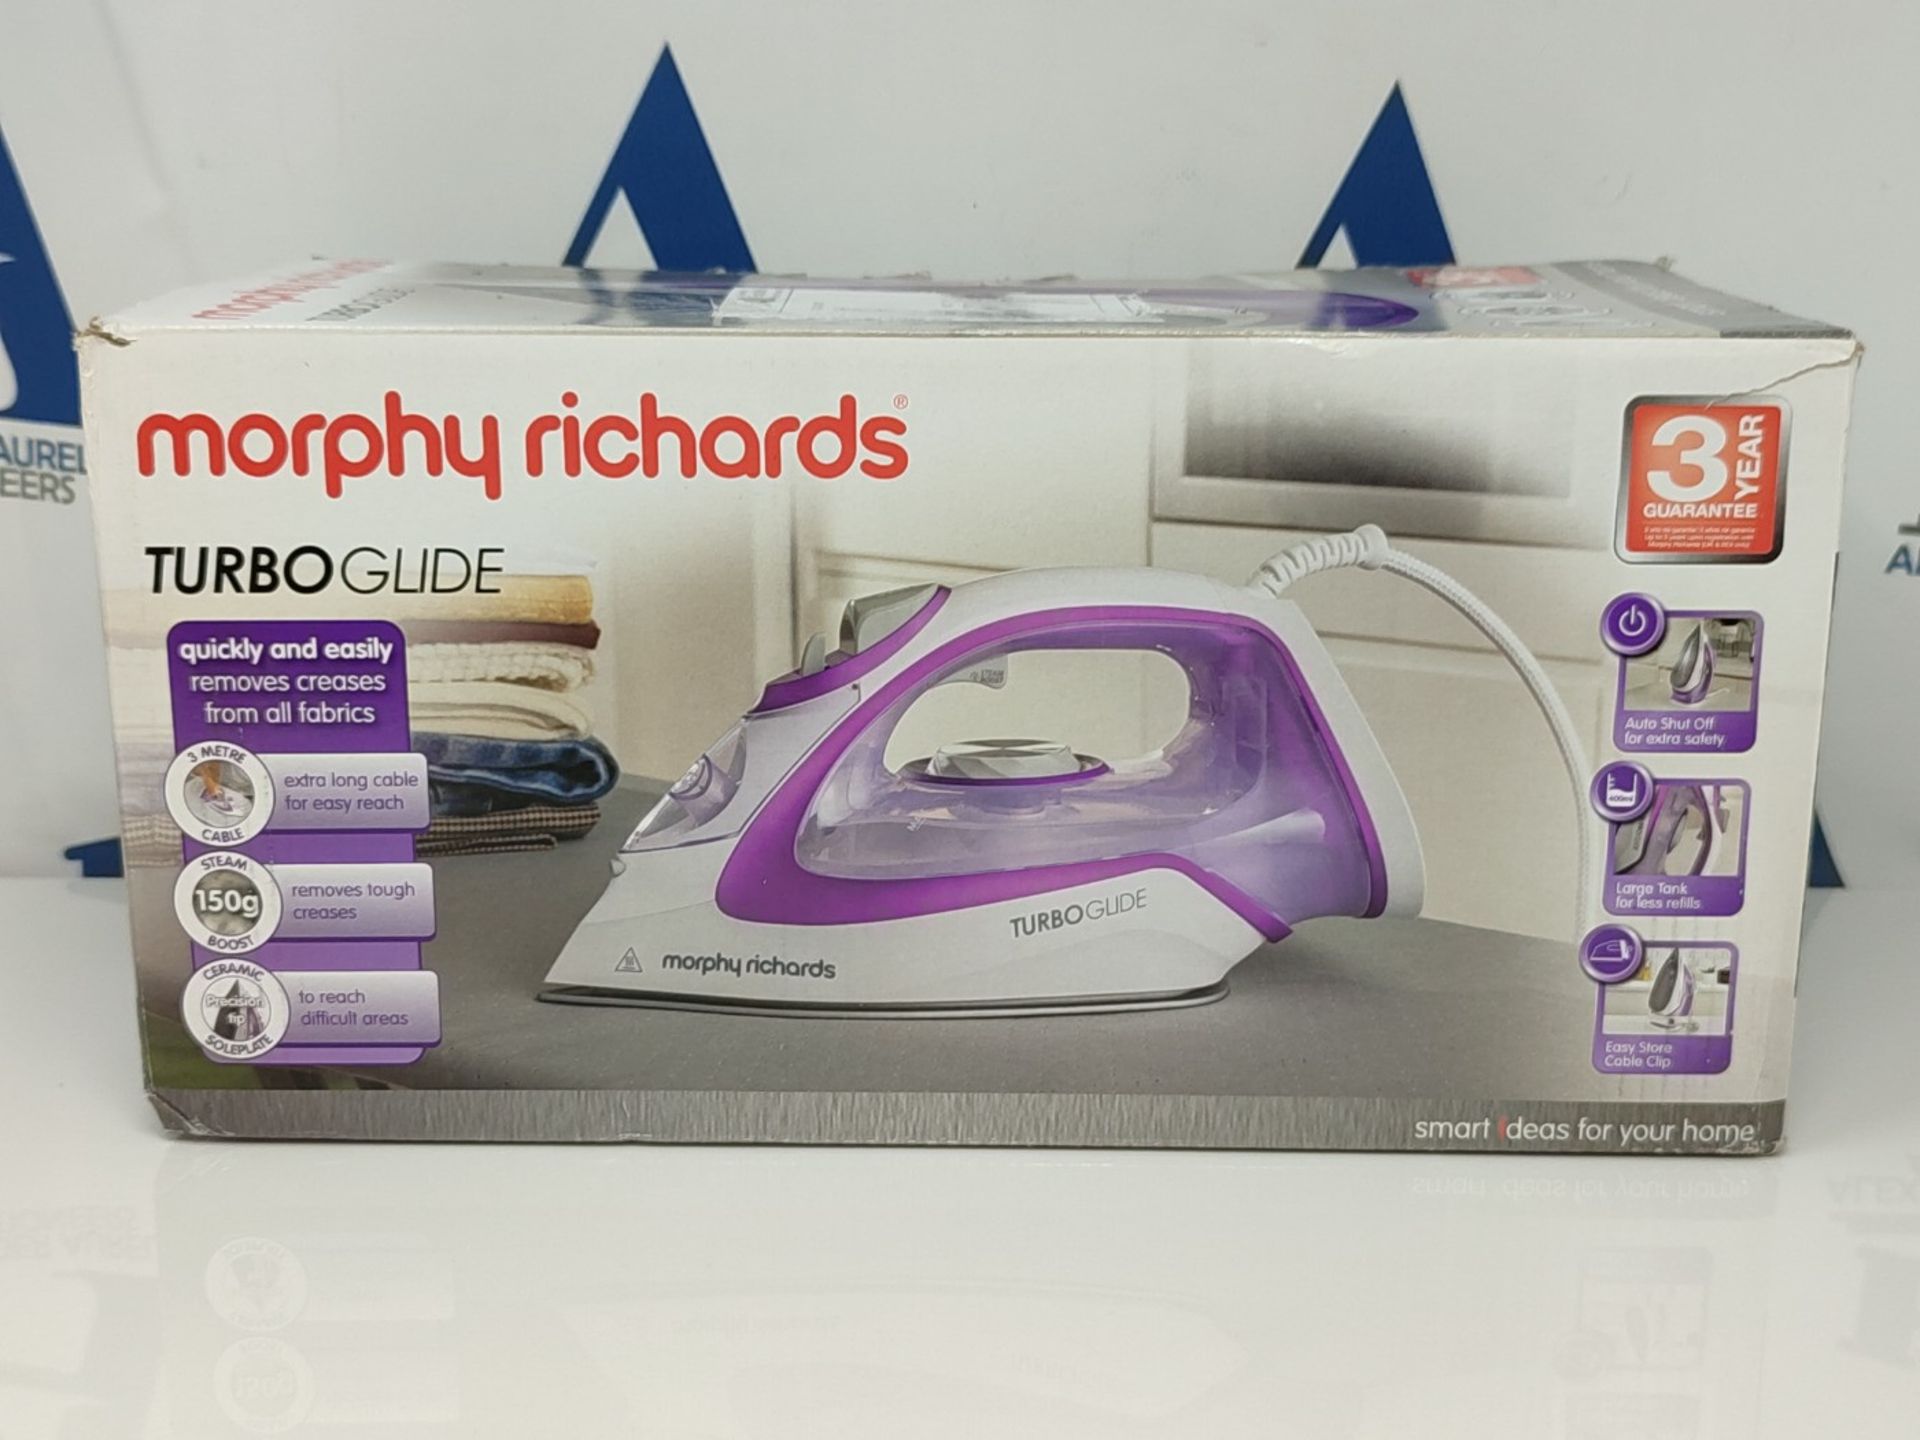 Morphy Richards 302000 Turbo Glide Steam Iron, 3 m Cable, 150 g Steam Shot, Auto Shut - Image 2 of 3